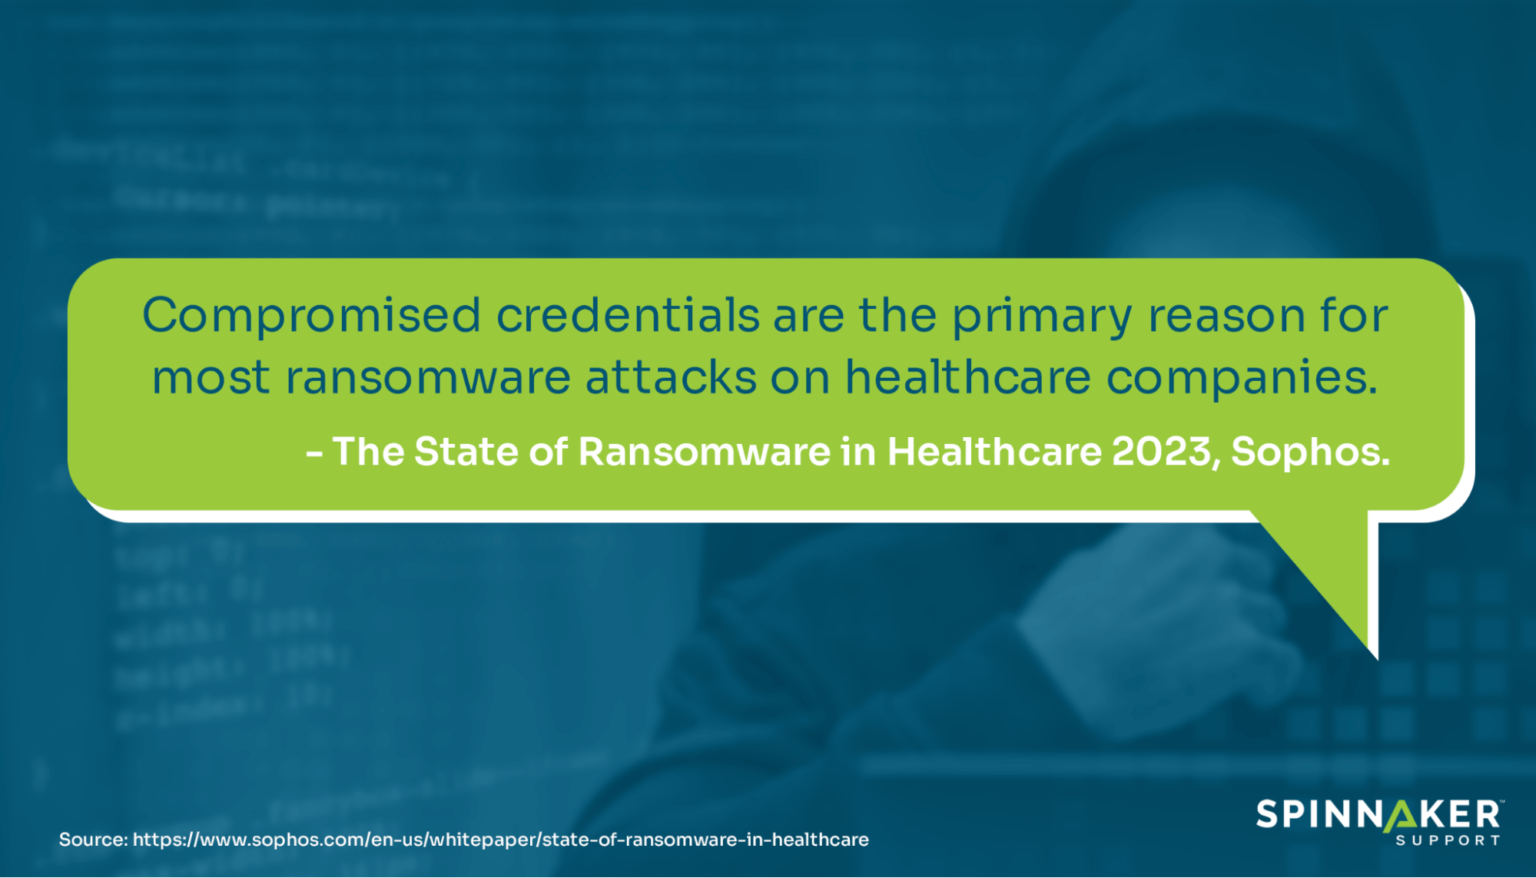 Ransomware attack on healthcare companies statistic